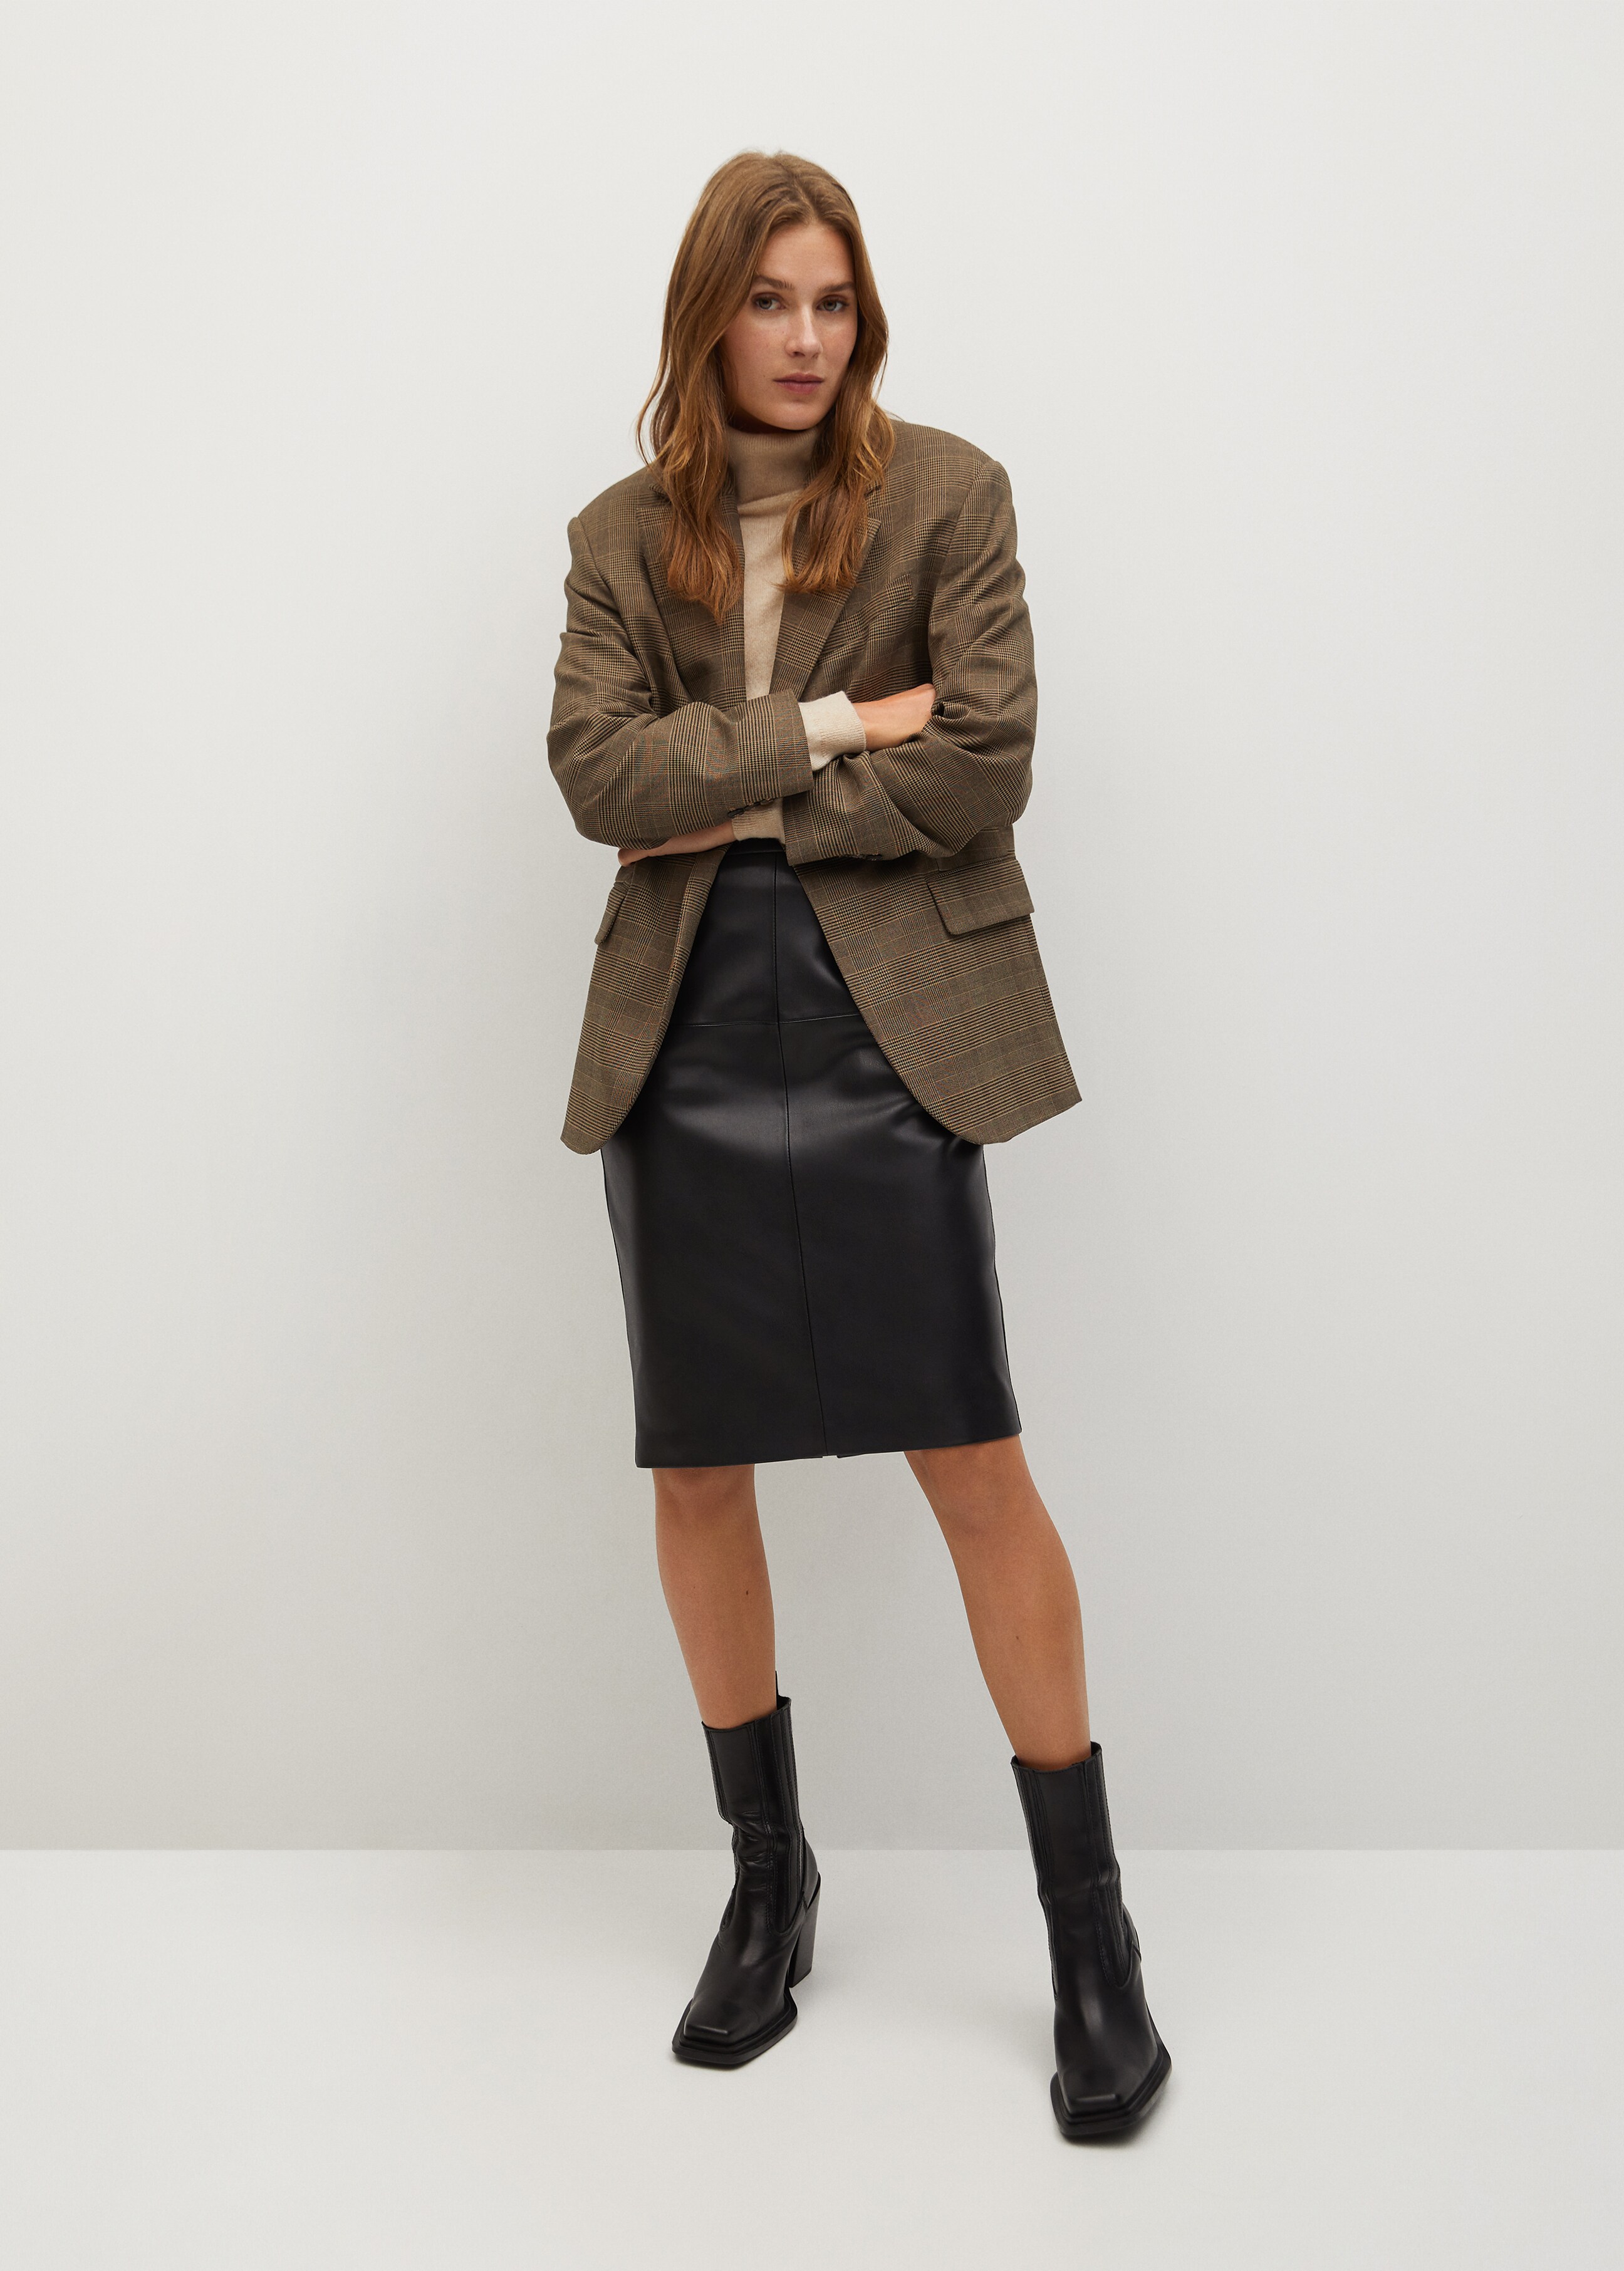 Faux-leather pencil skirt - General plane